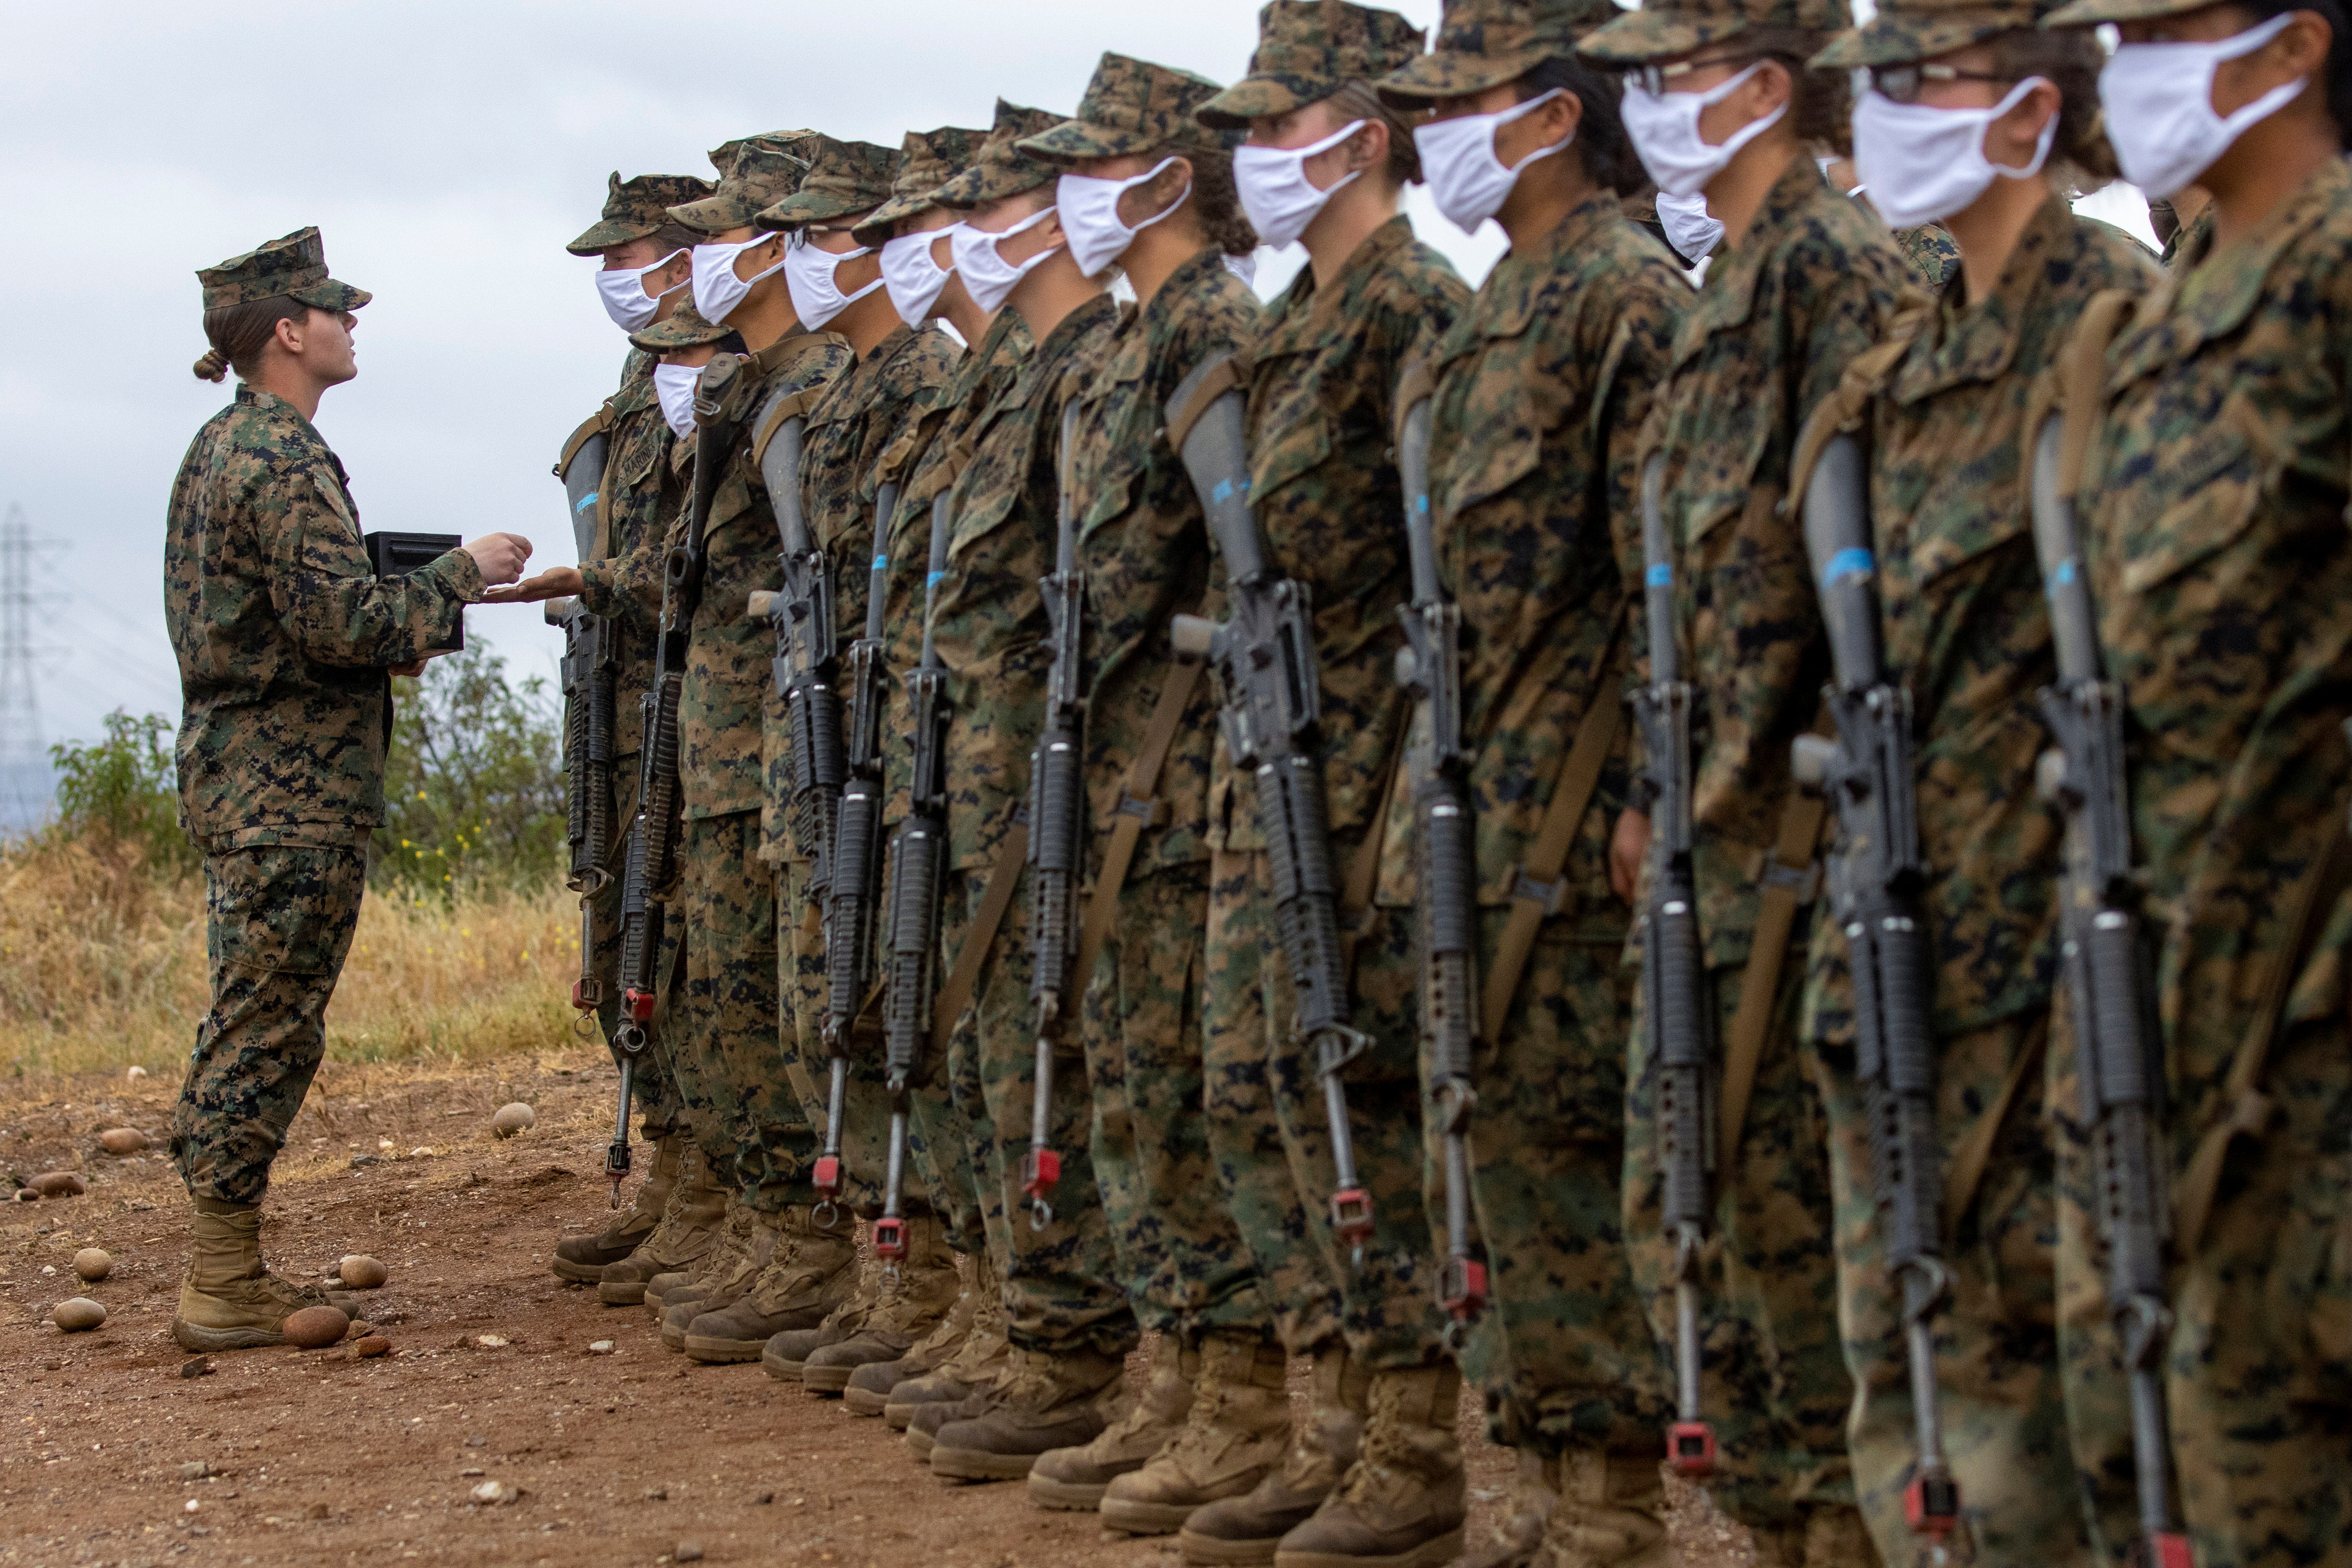 The women of Lima Company are breaking a barrier in the U.S. Marine Corps becoming Marines ever trained at Camp Pendleton.